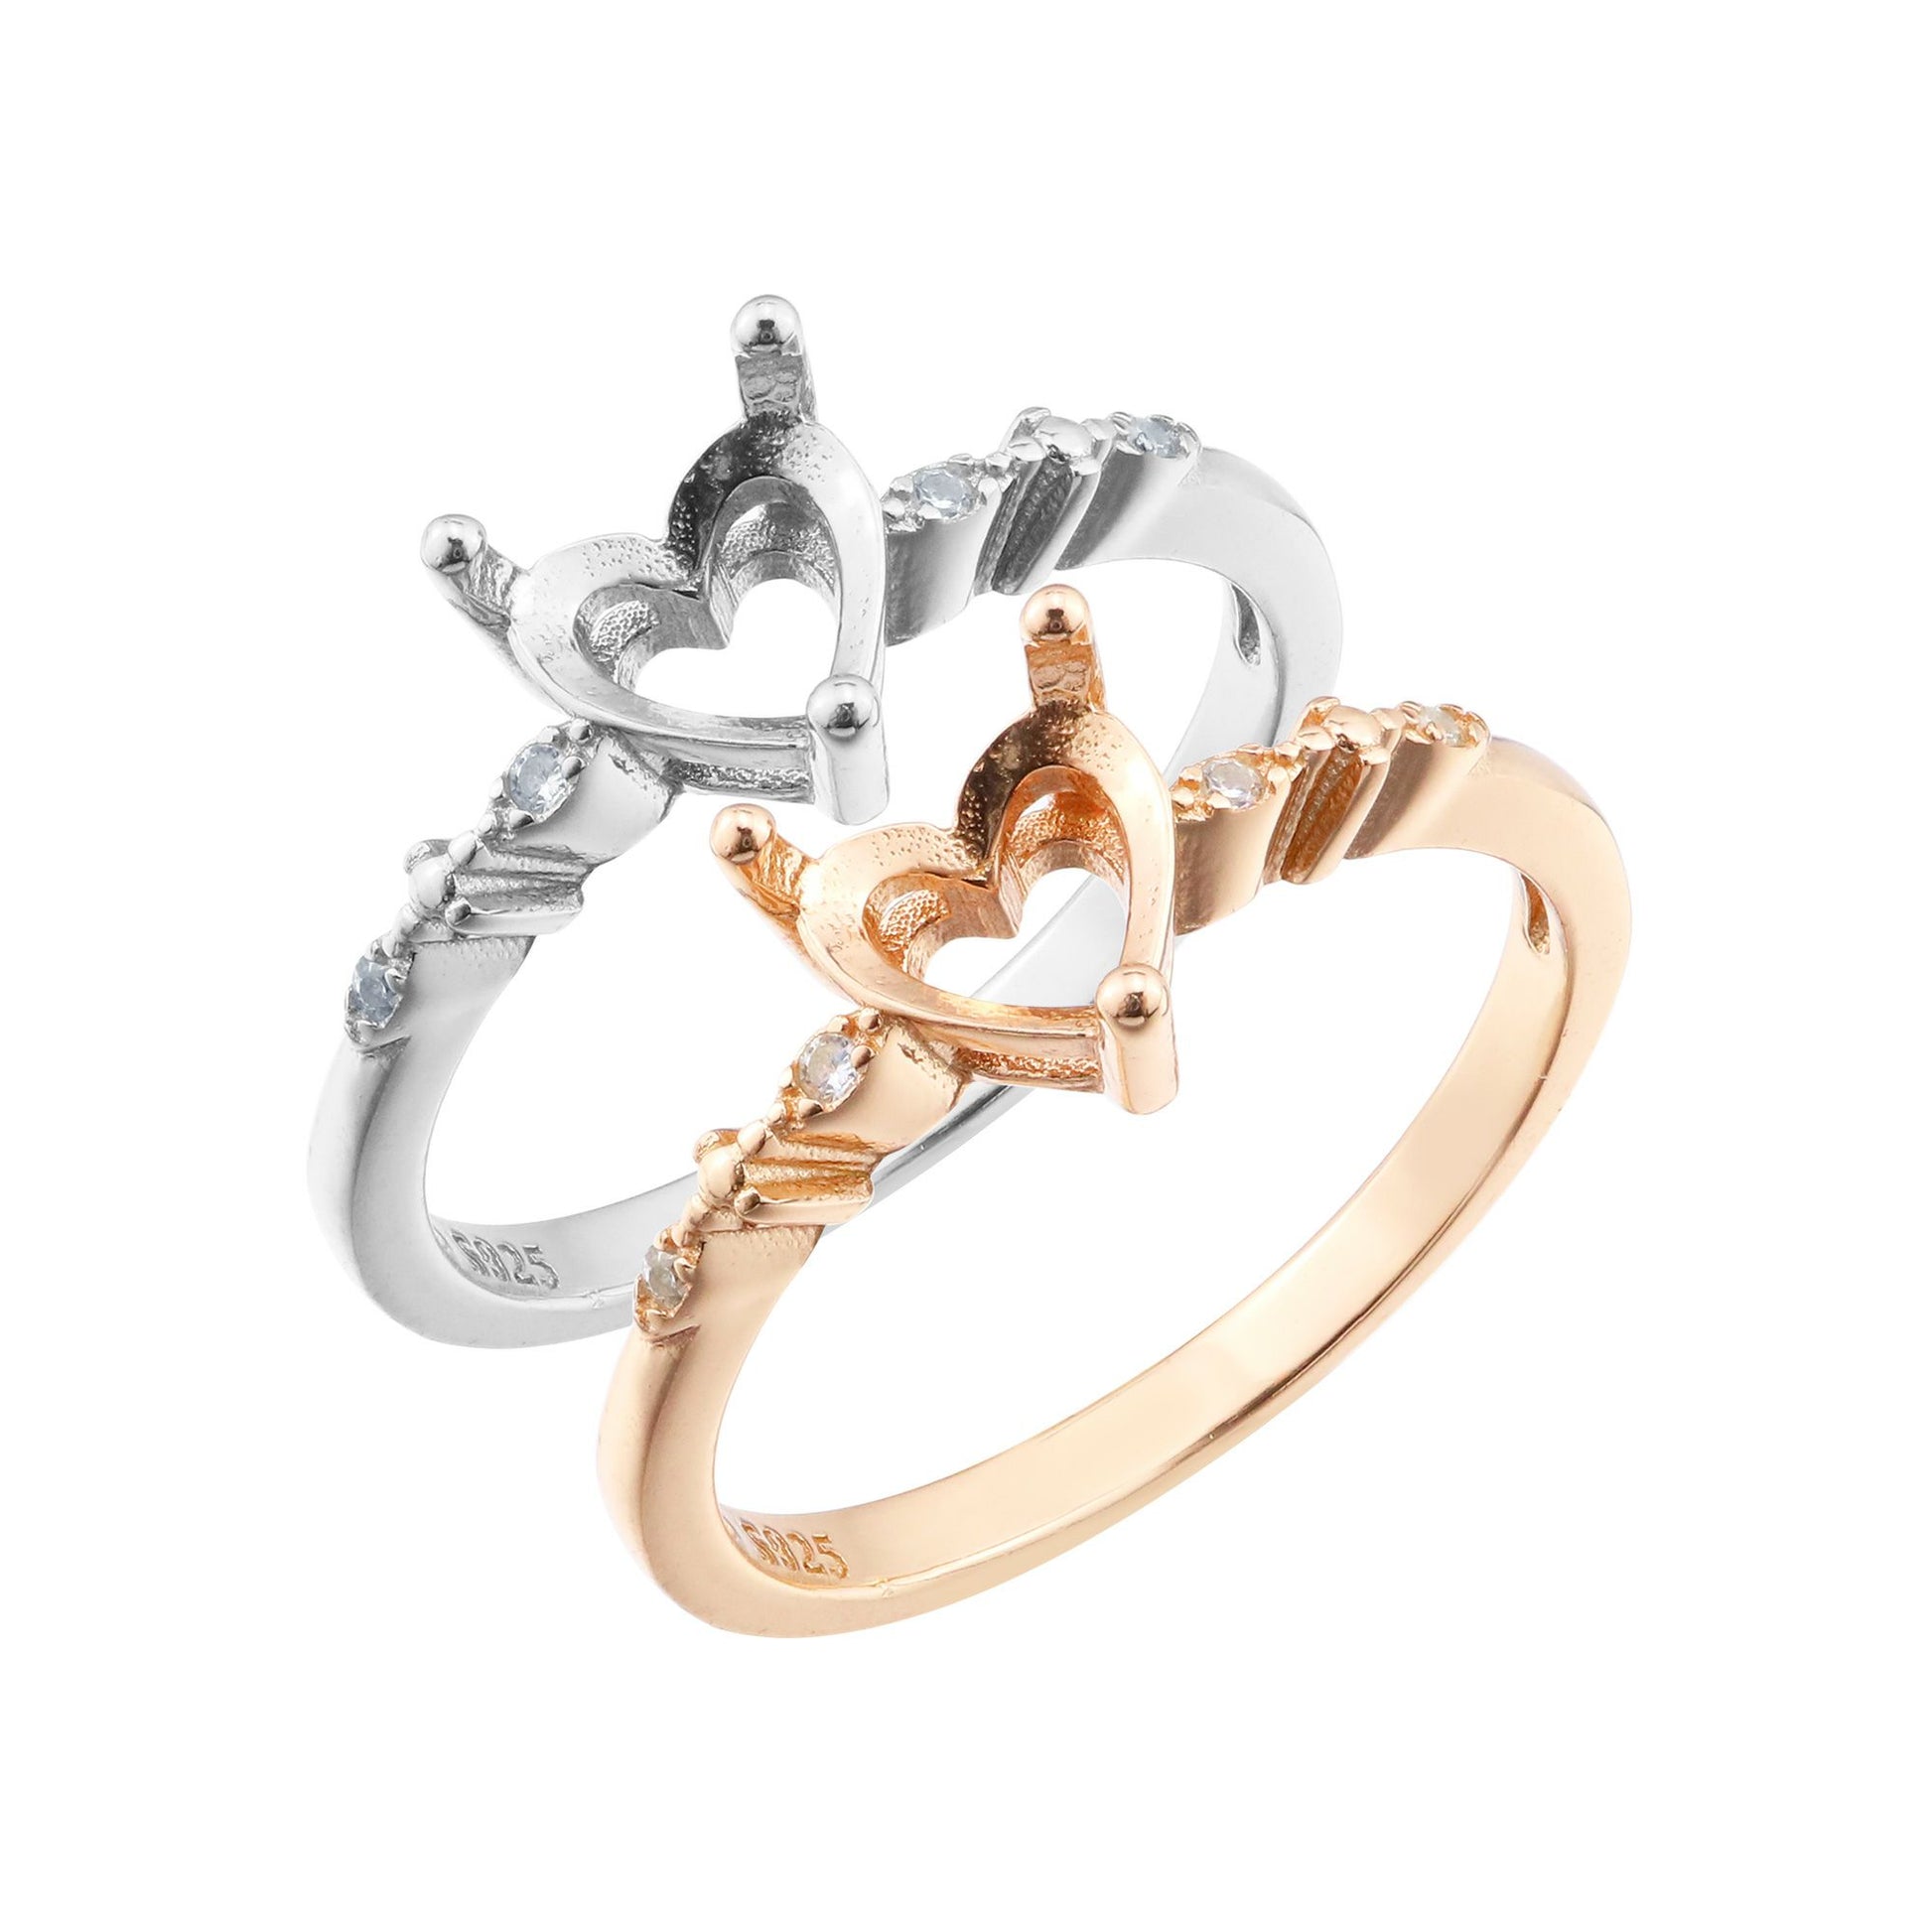 One silver and one rose gold semi mounts to fit a heart cut gem with small round accent gems on the band.